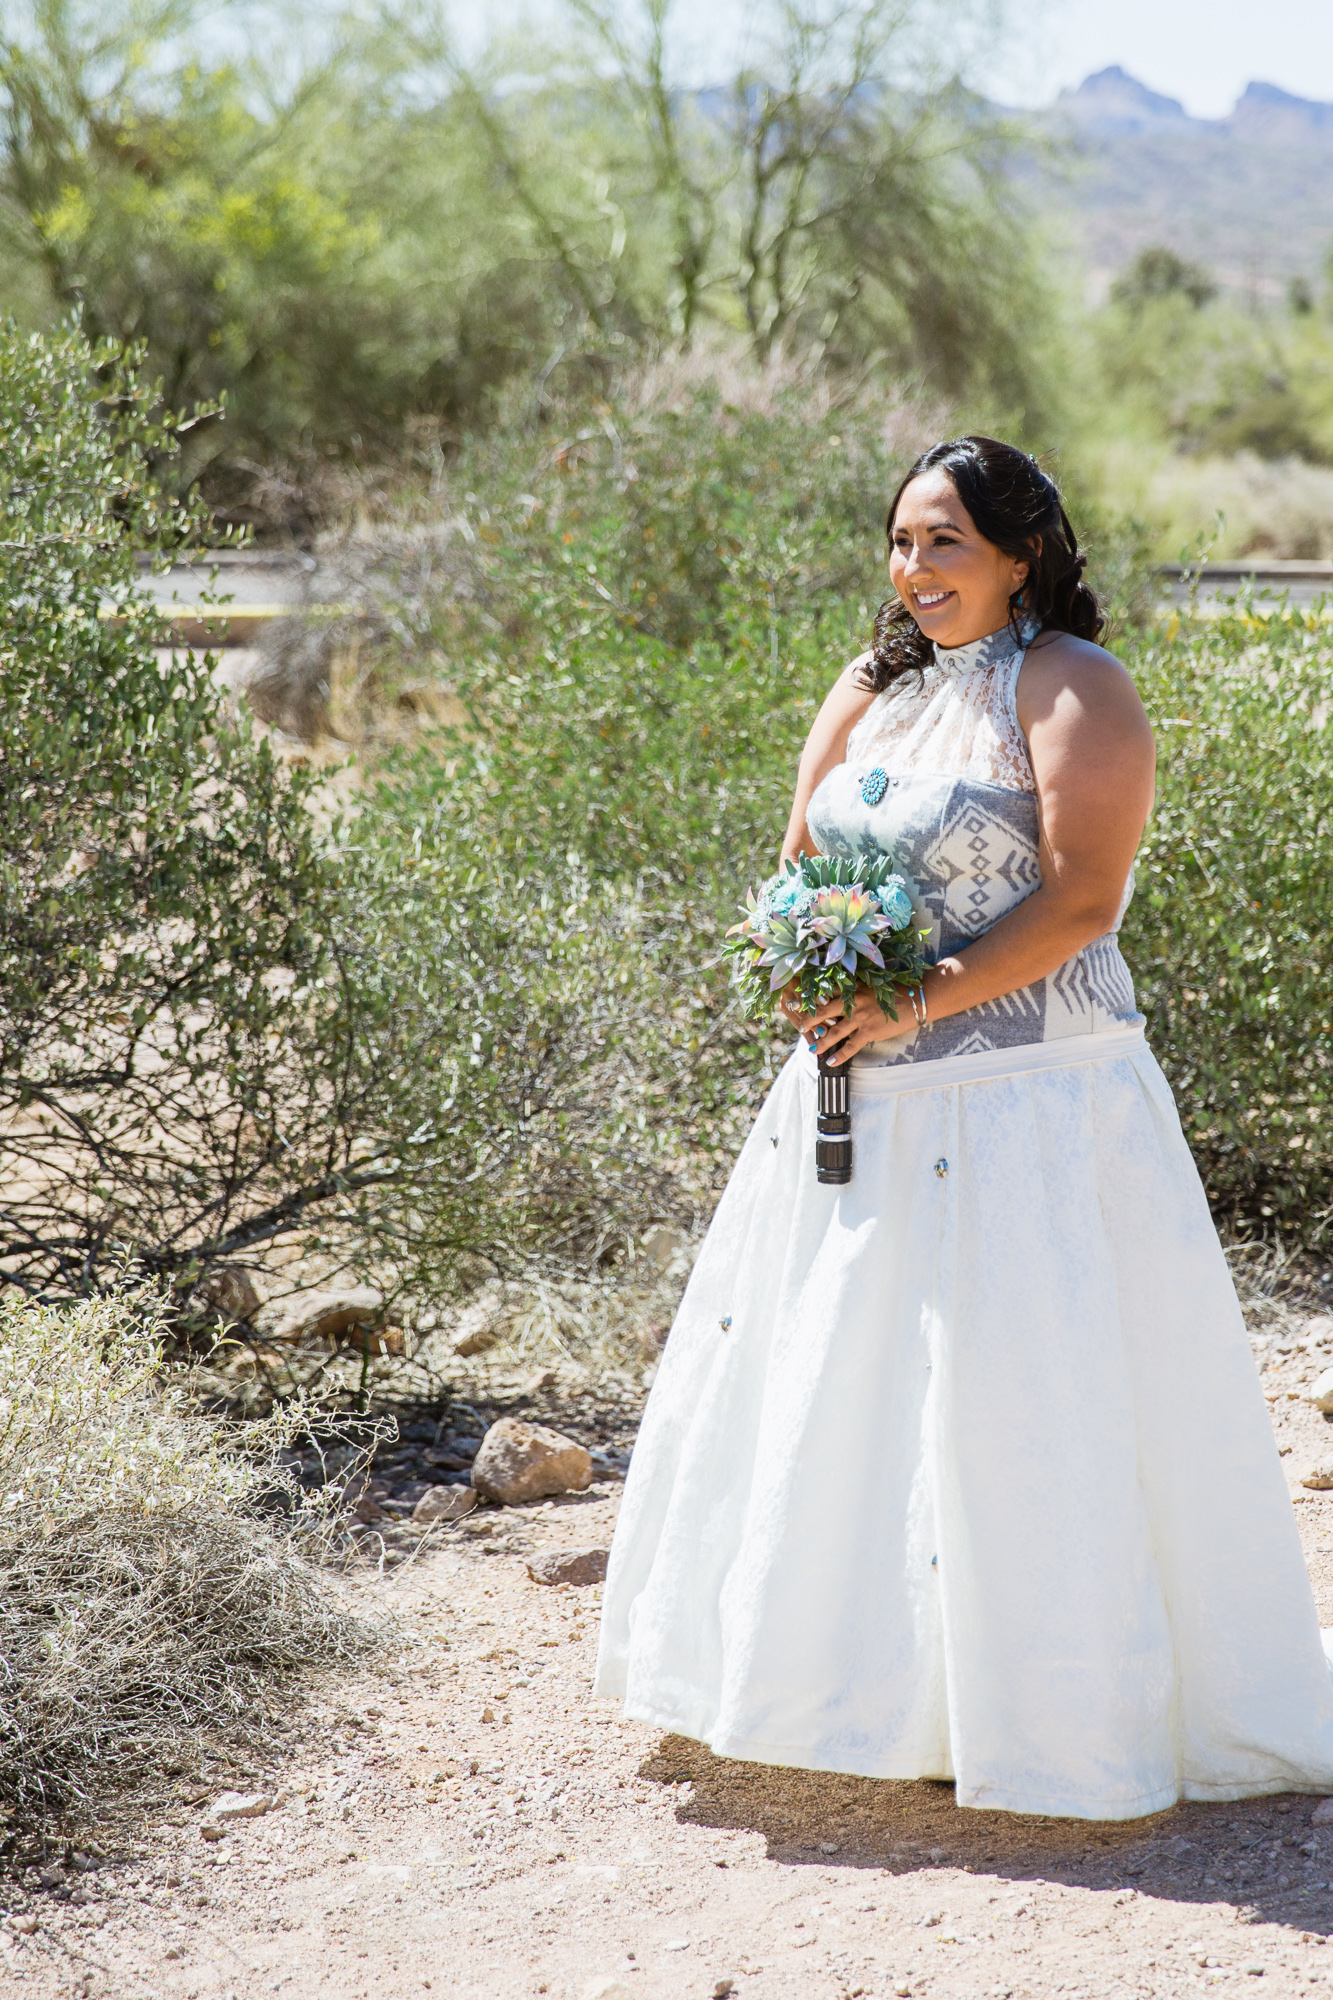 Bride seeing her groom for the first time during their first look at Lost Dutchman state park by wedding photographer PMA Photography.